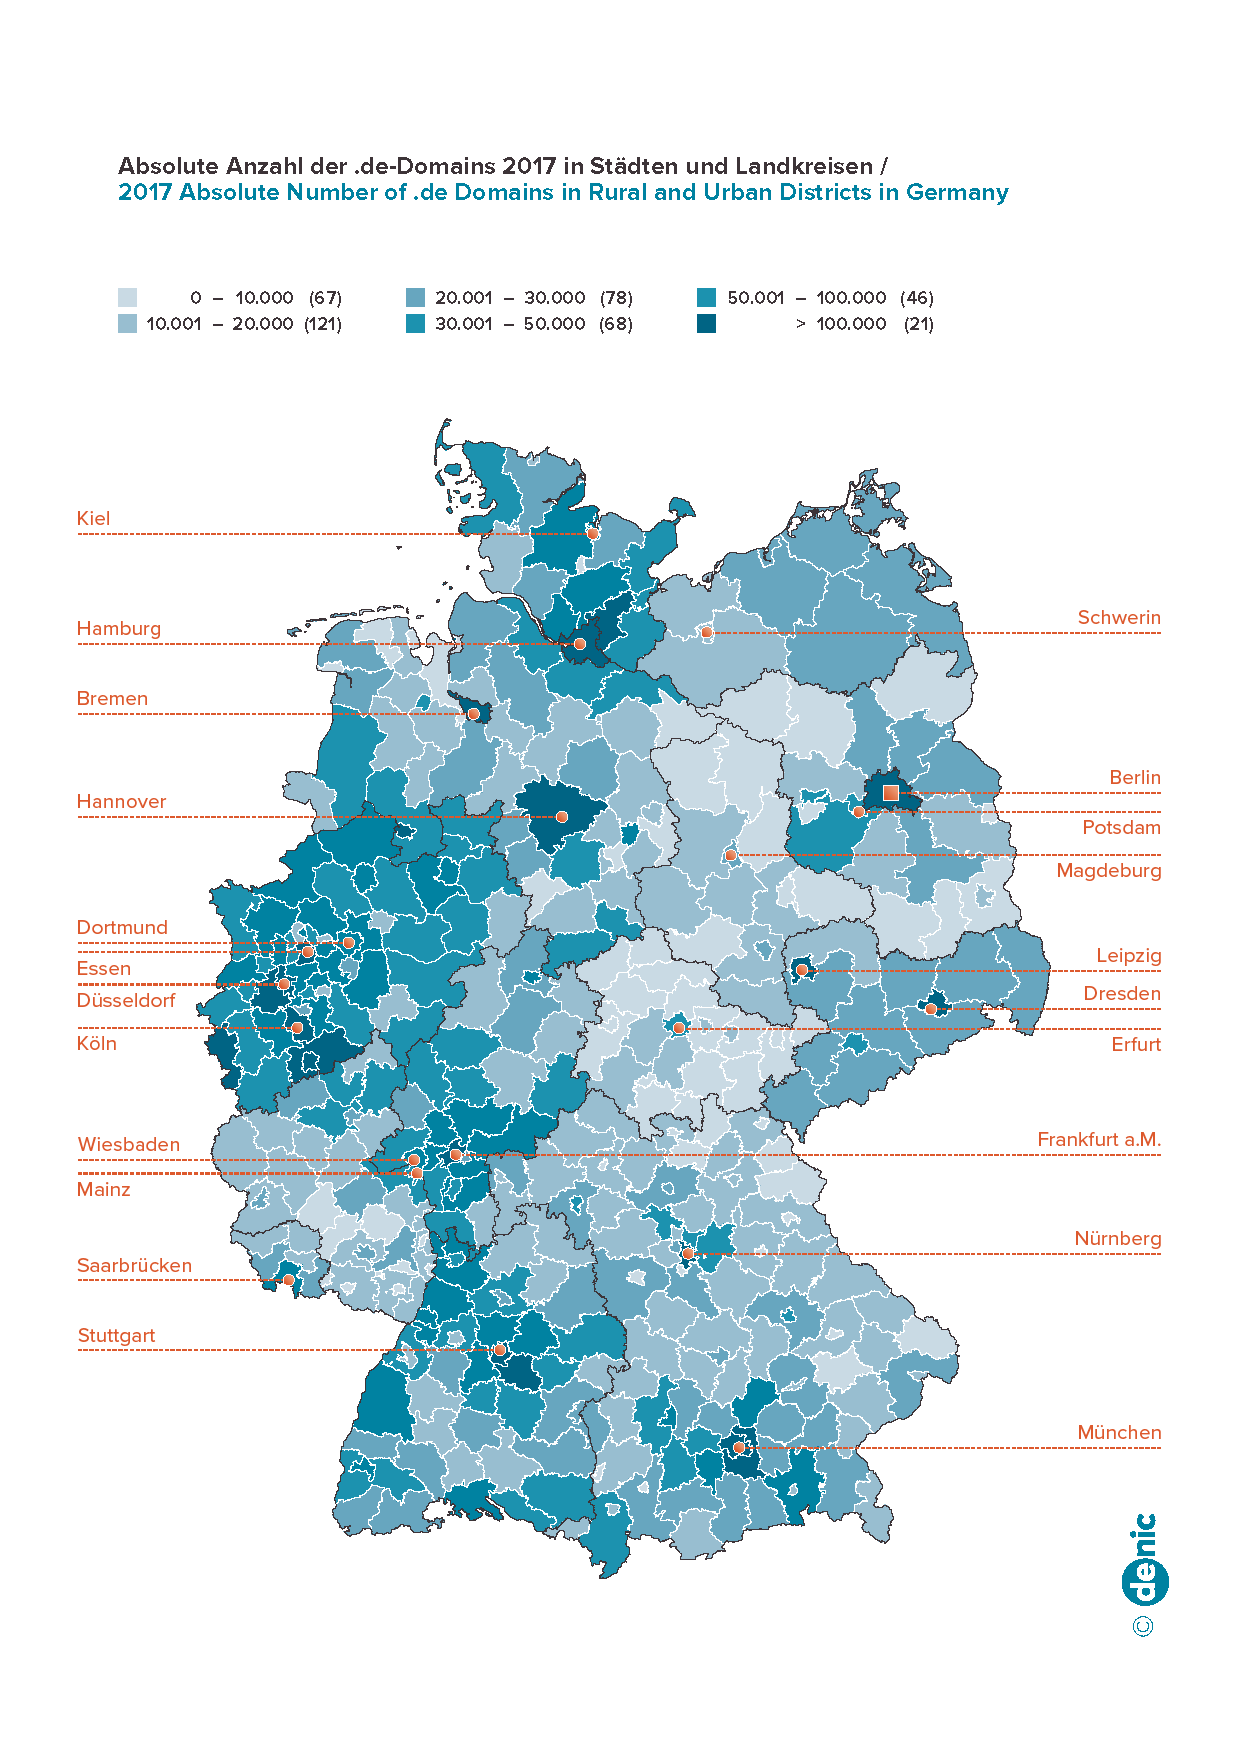 Absolute Number of .de Domains in Cities and Districts in Germany 2017